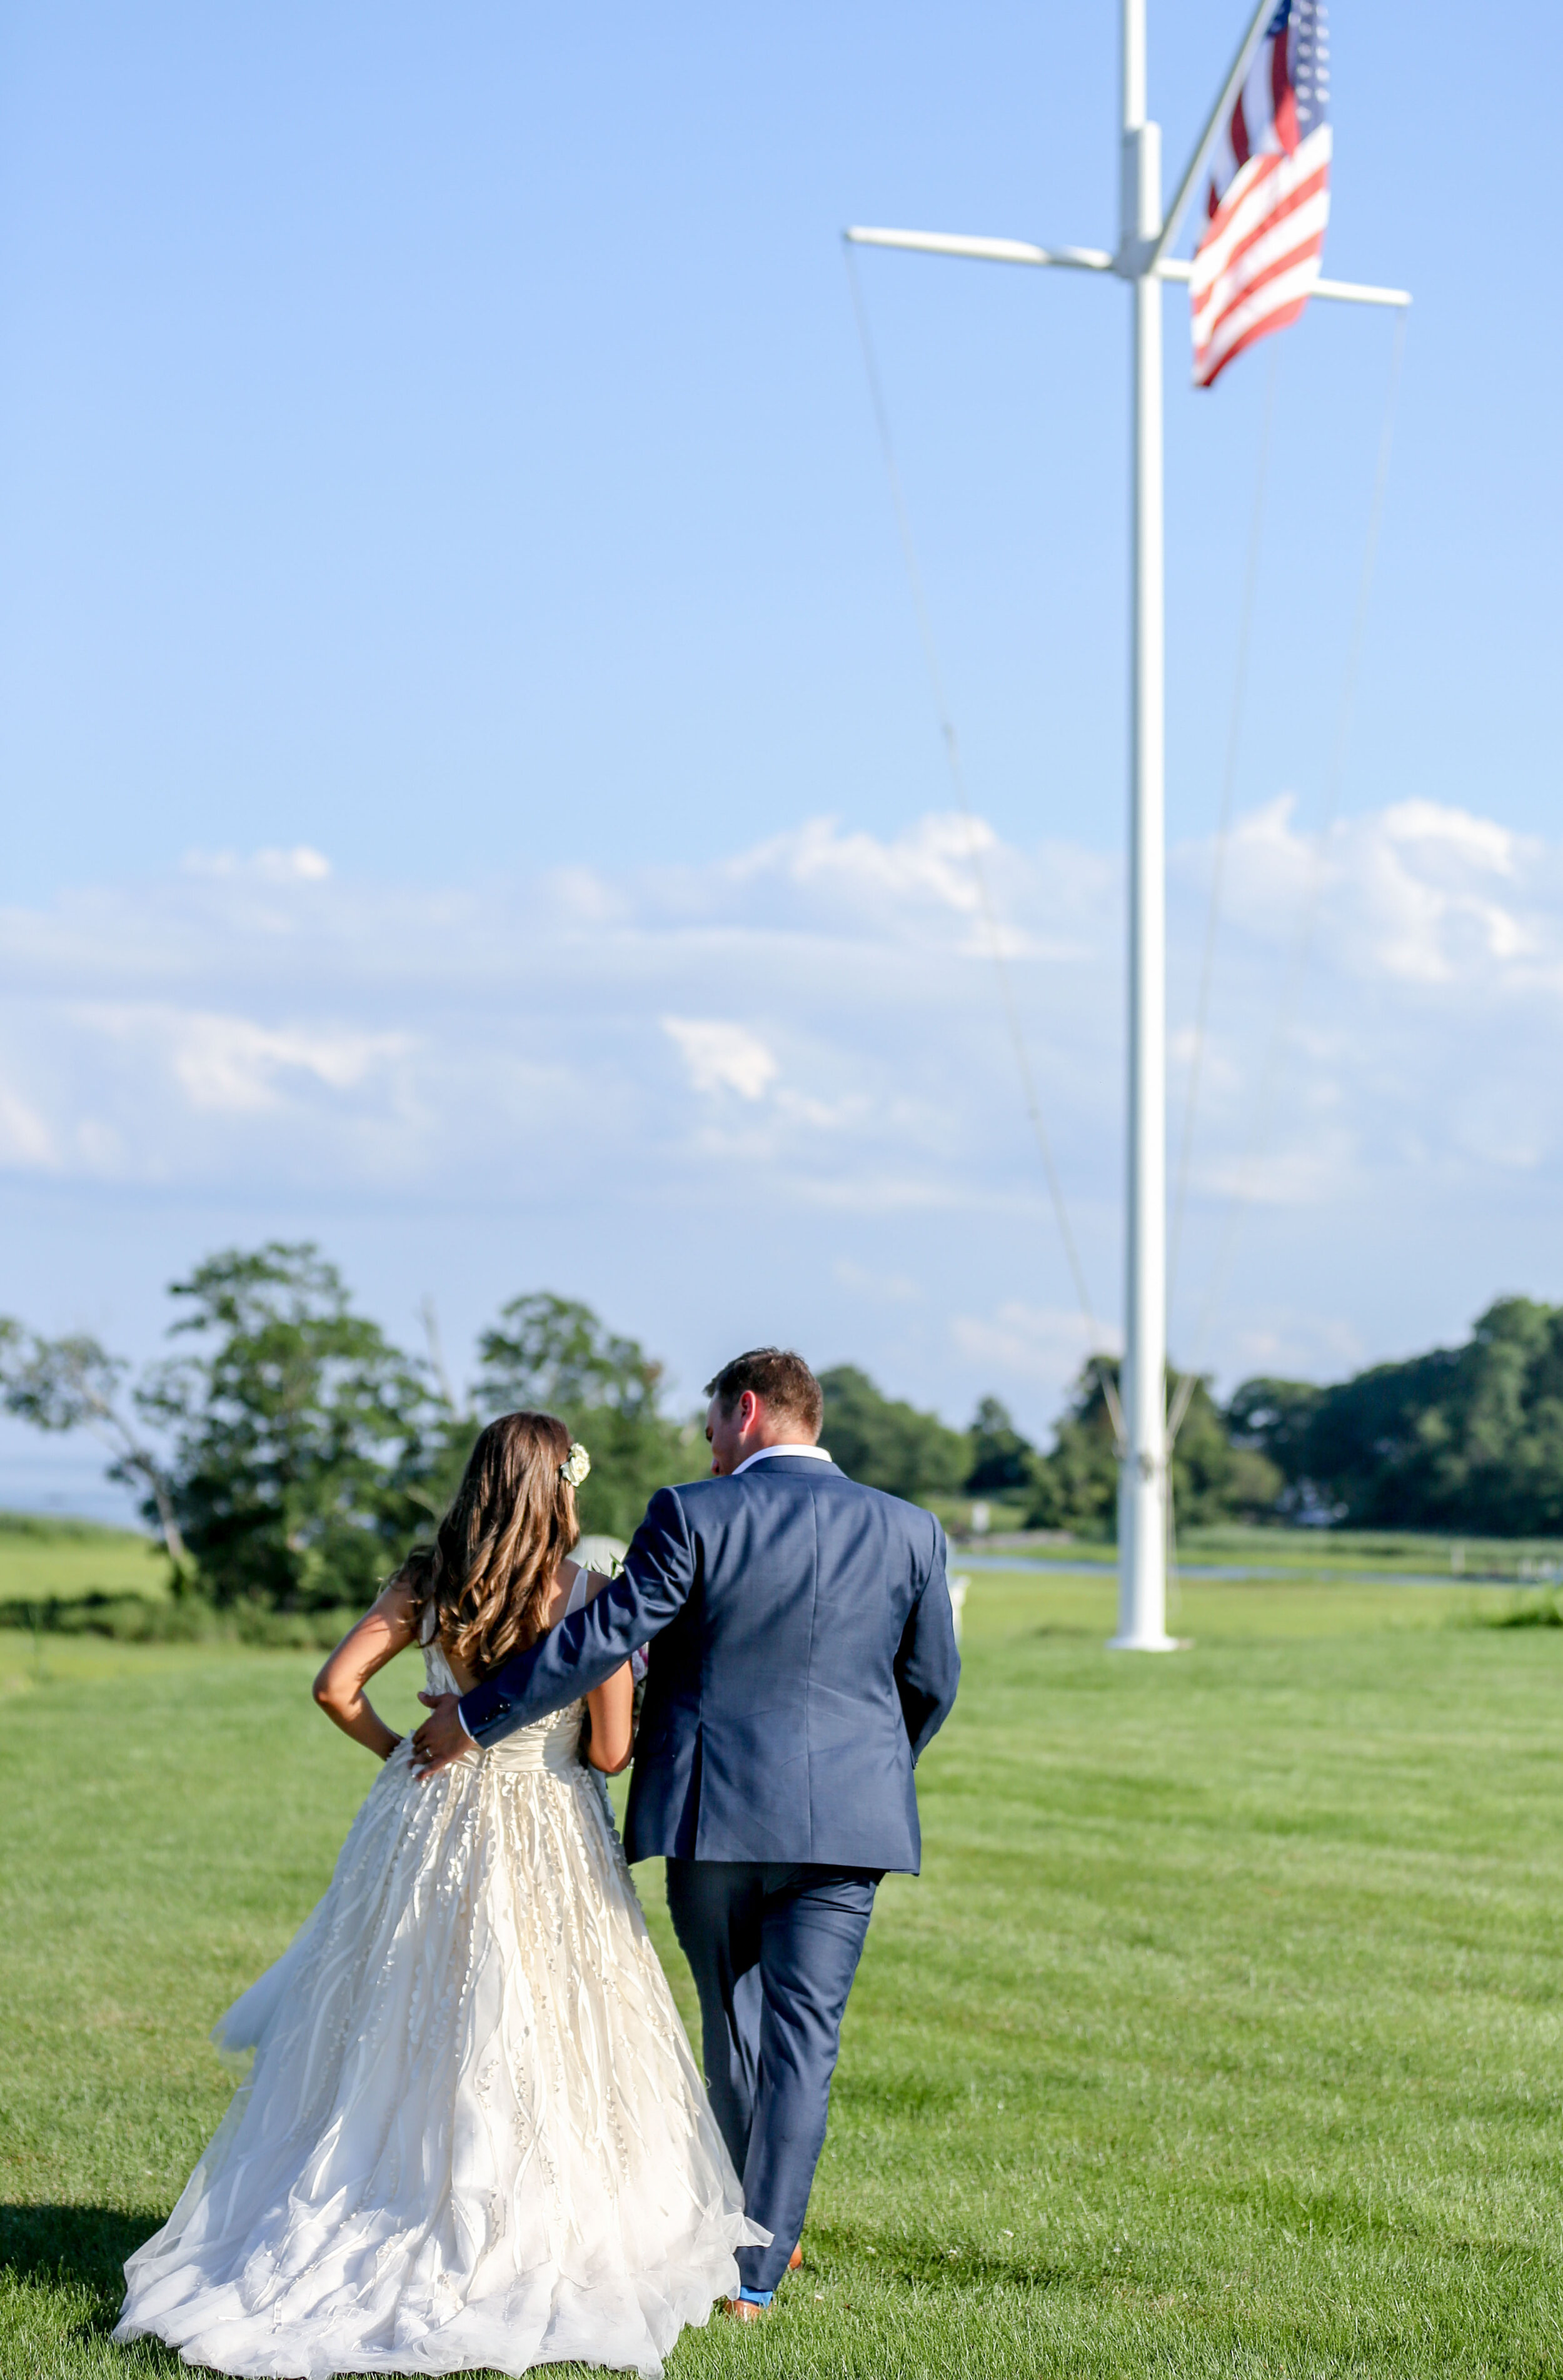  WEDDING IN GUILFORD, CT AT GUILFORD YACHT CLUB 